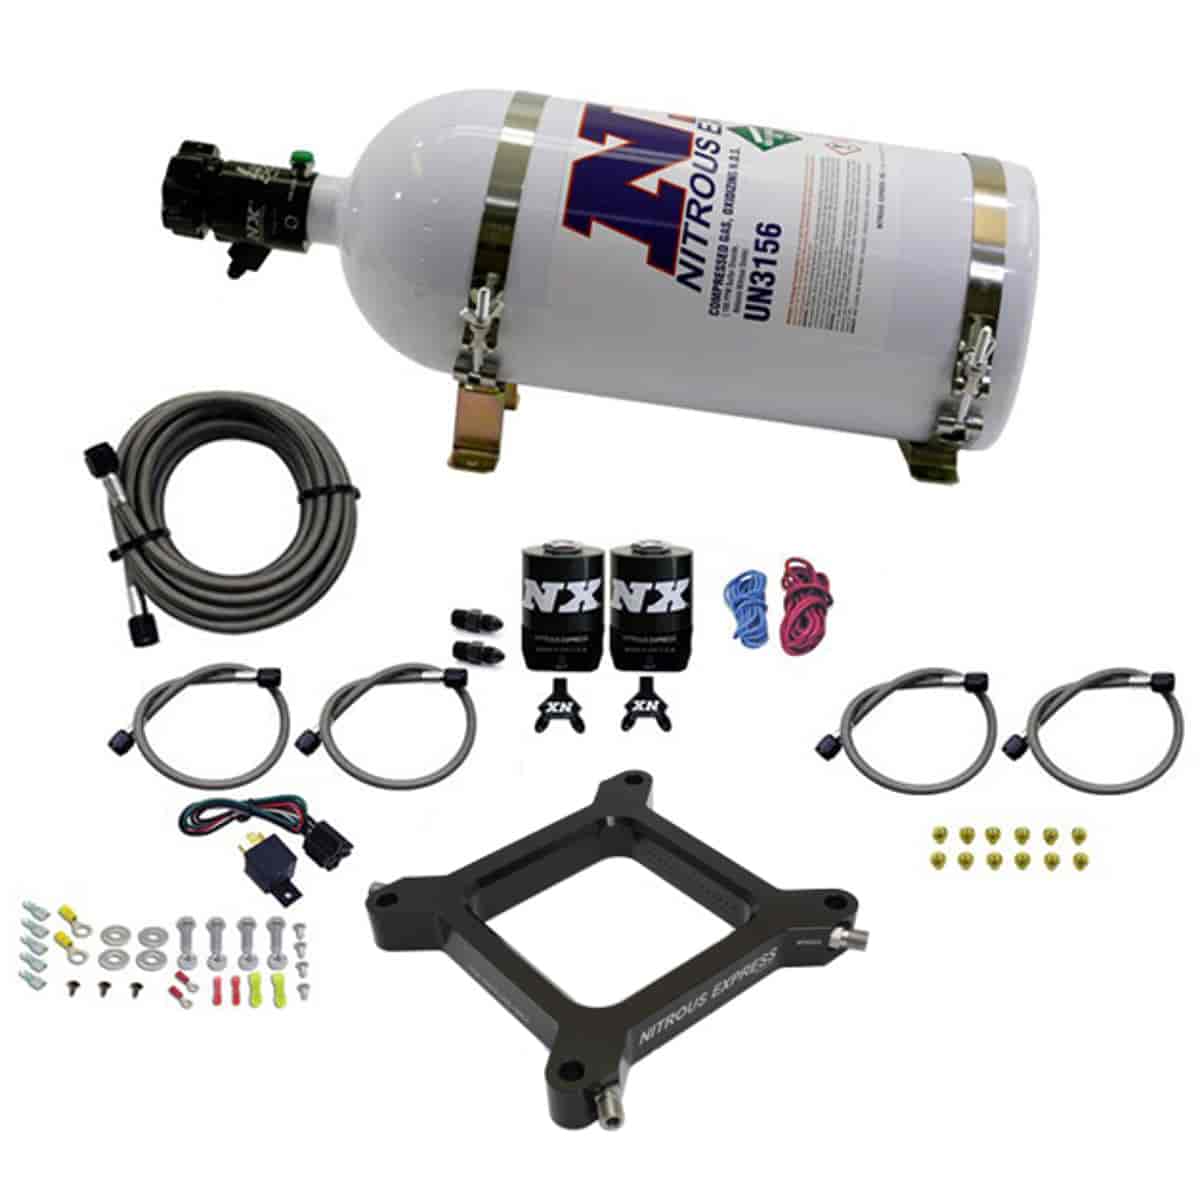 Assassin Nitrous Plate System [Holley 4150 Carb Spray Plate]